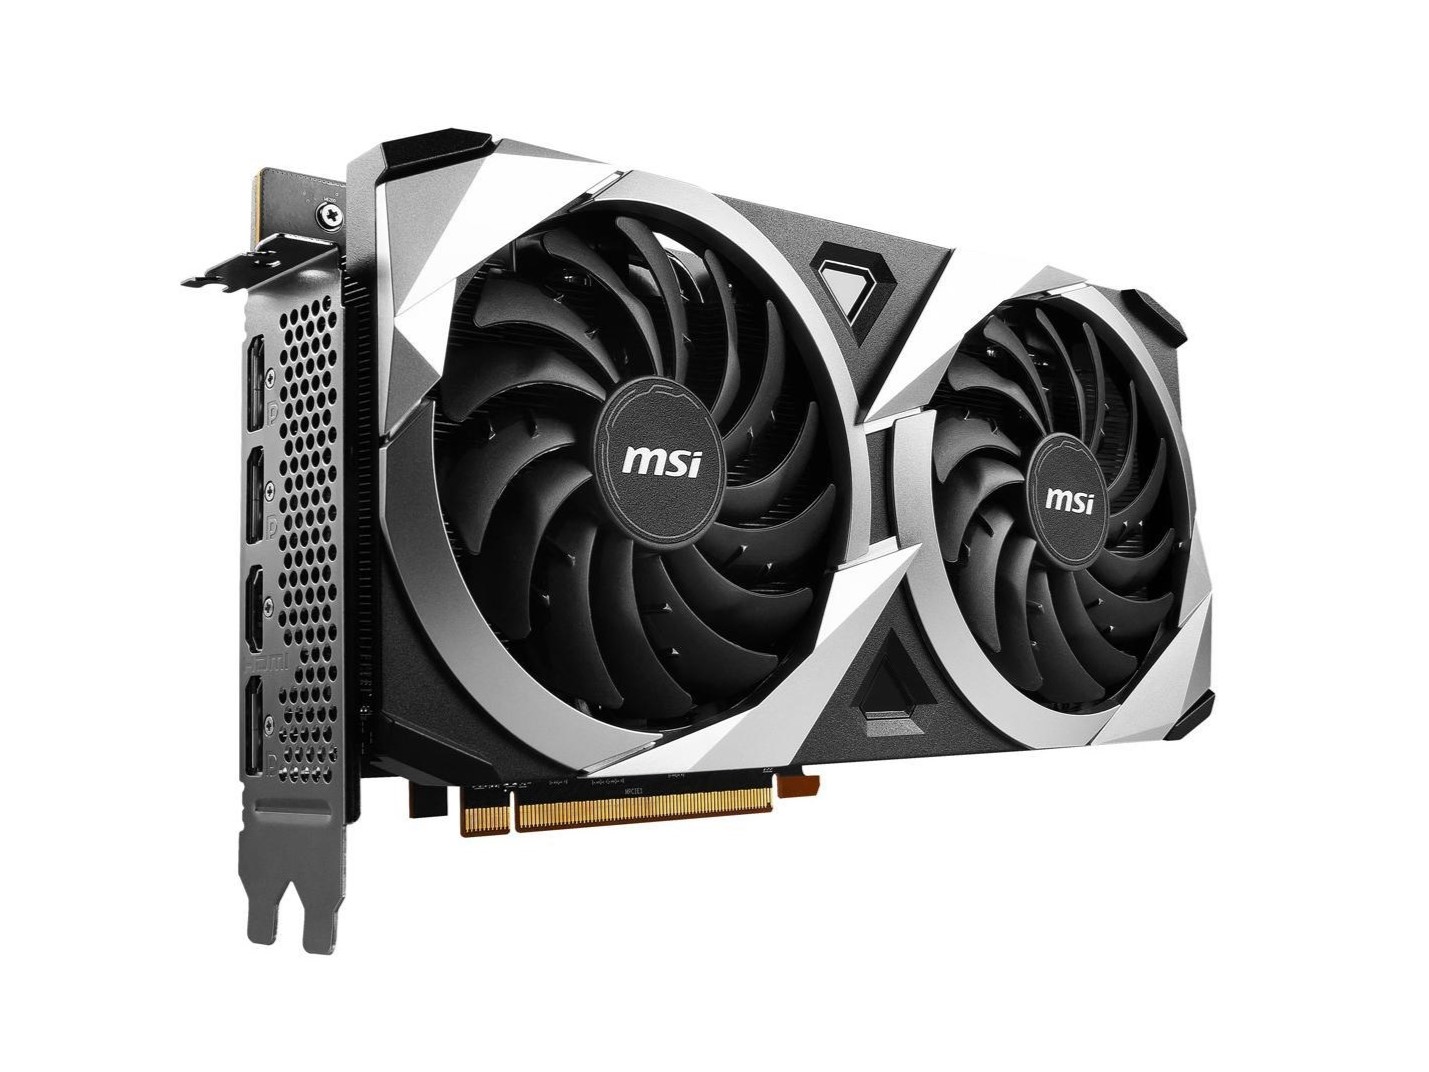 MSI Mech Radeon RX 6750 XT with 12GB product image